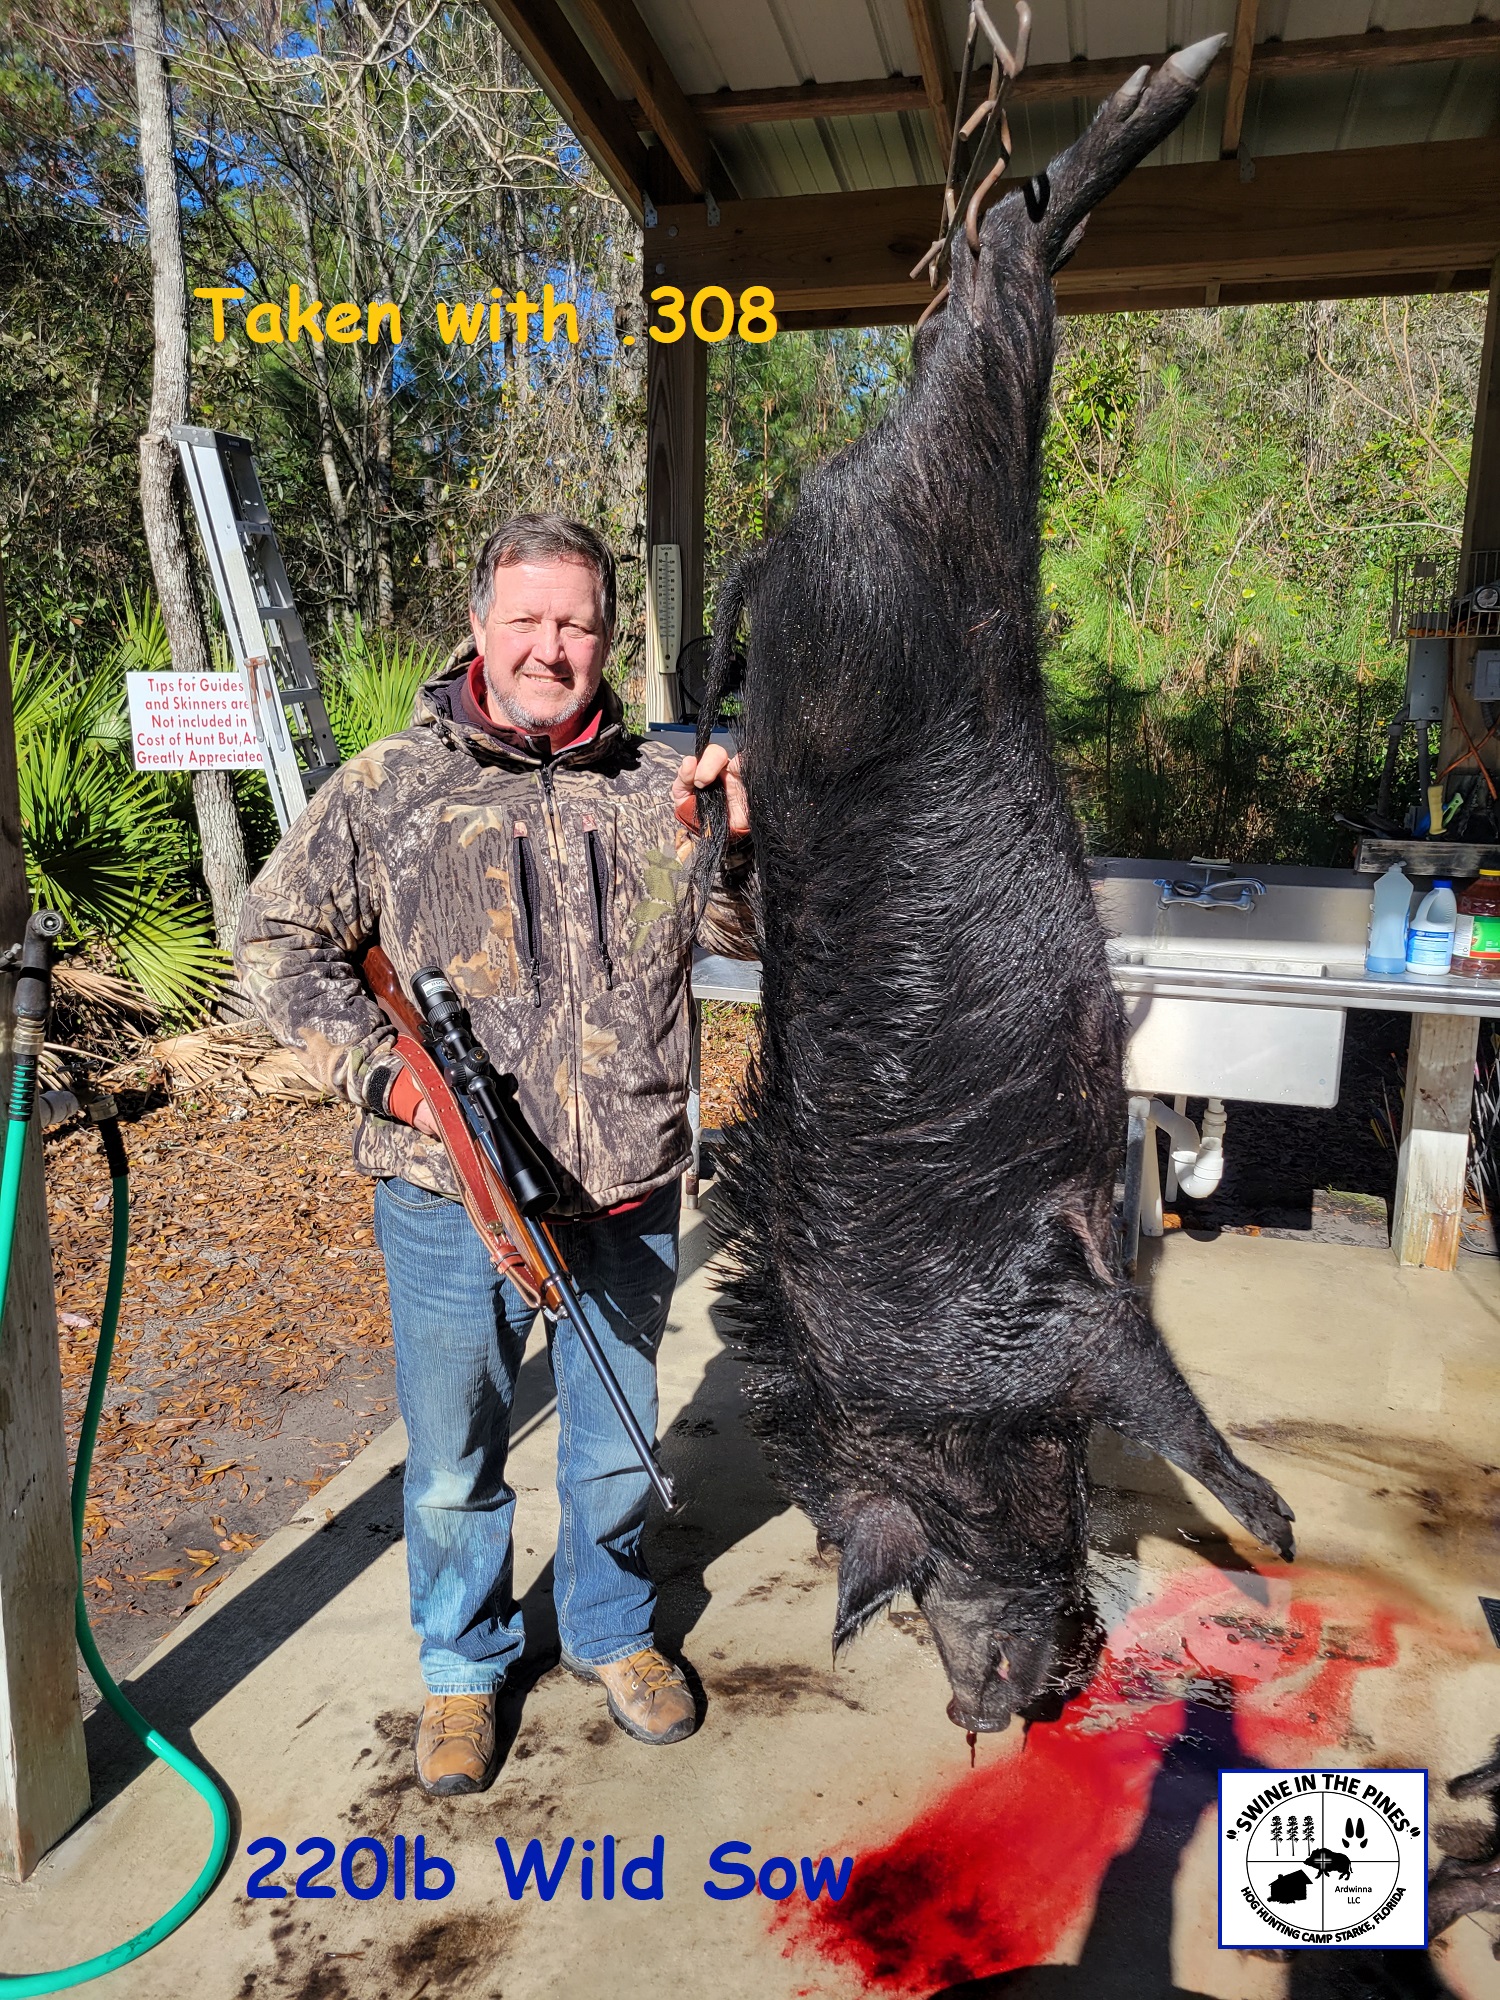 Nice 220lb Wild Sow taken on a Guided Morning Hog Hunt at Swine In The Pines Wild Hog Hunting Camp